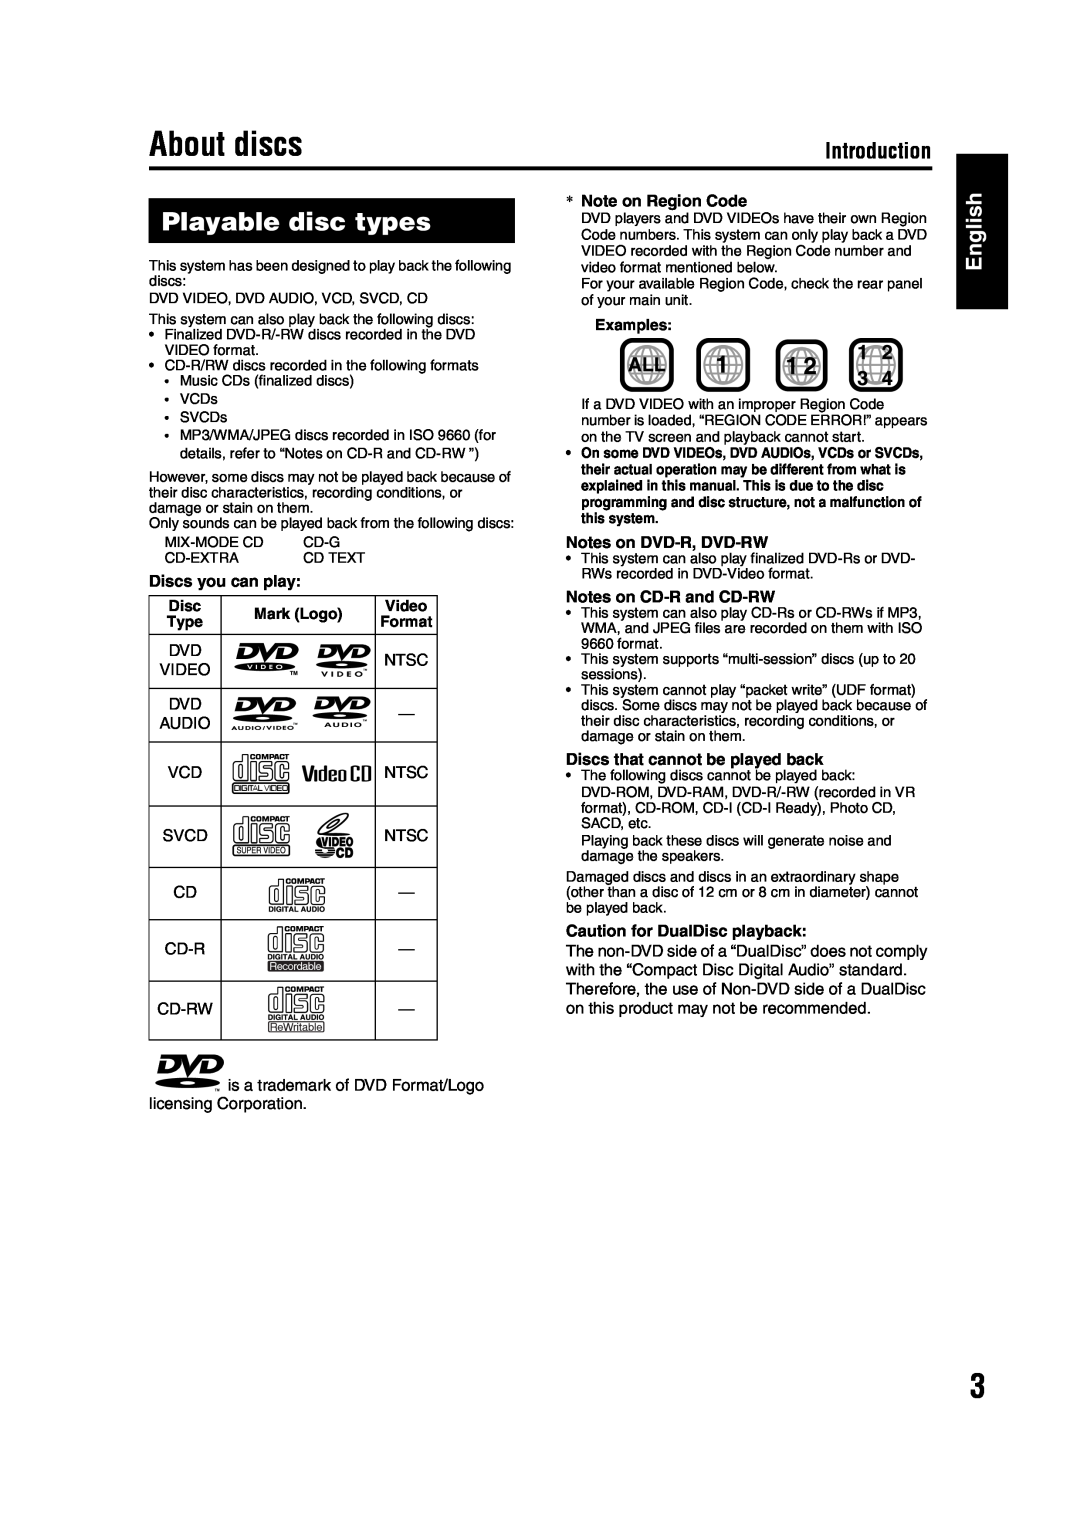 JVC GVT0142-001A manual About discs, Playable disc types, English, Introduction, Discs you can play, Note on Region Code 